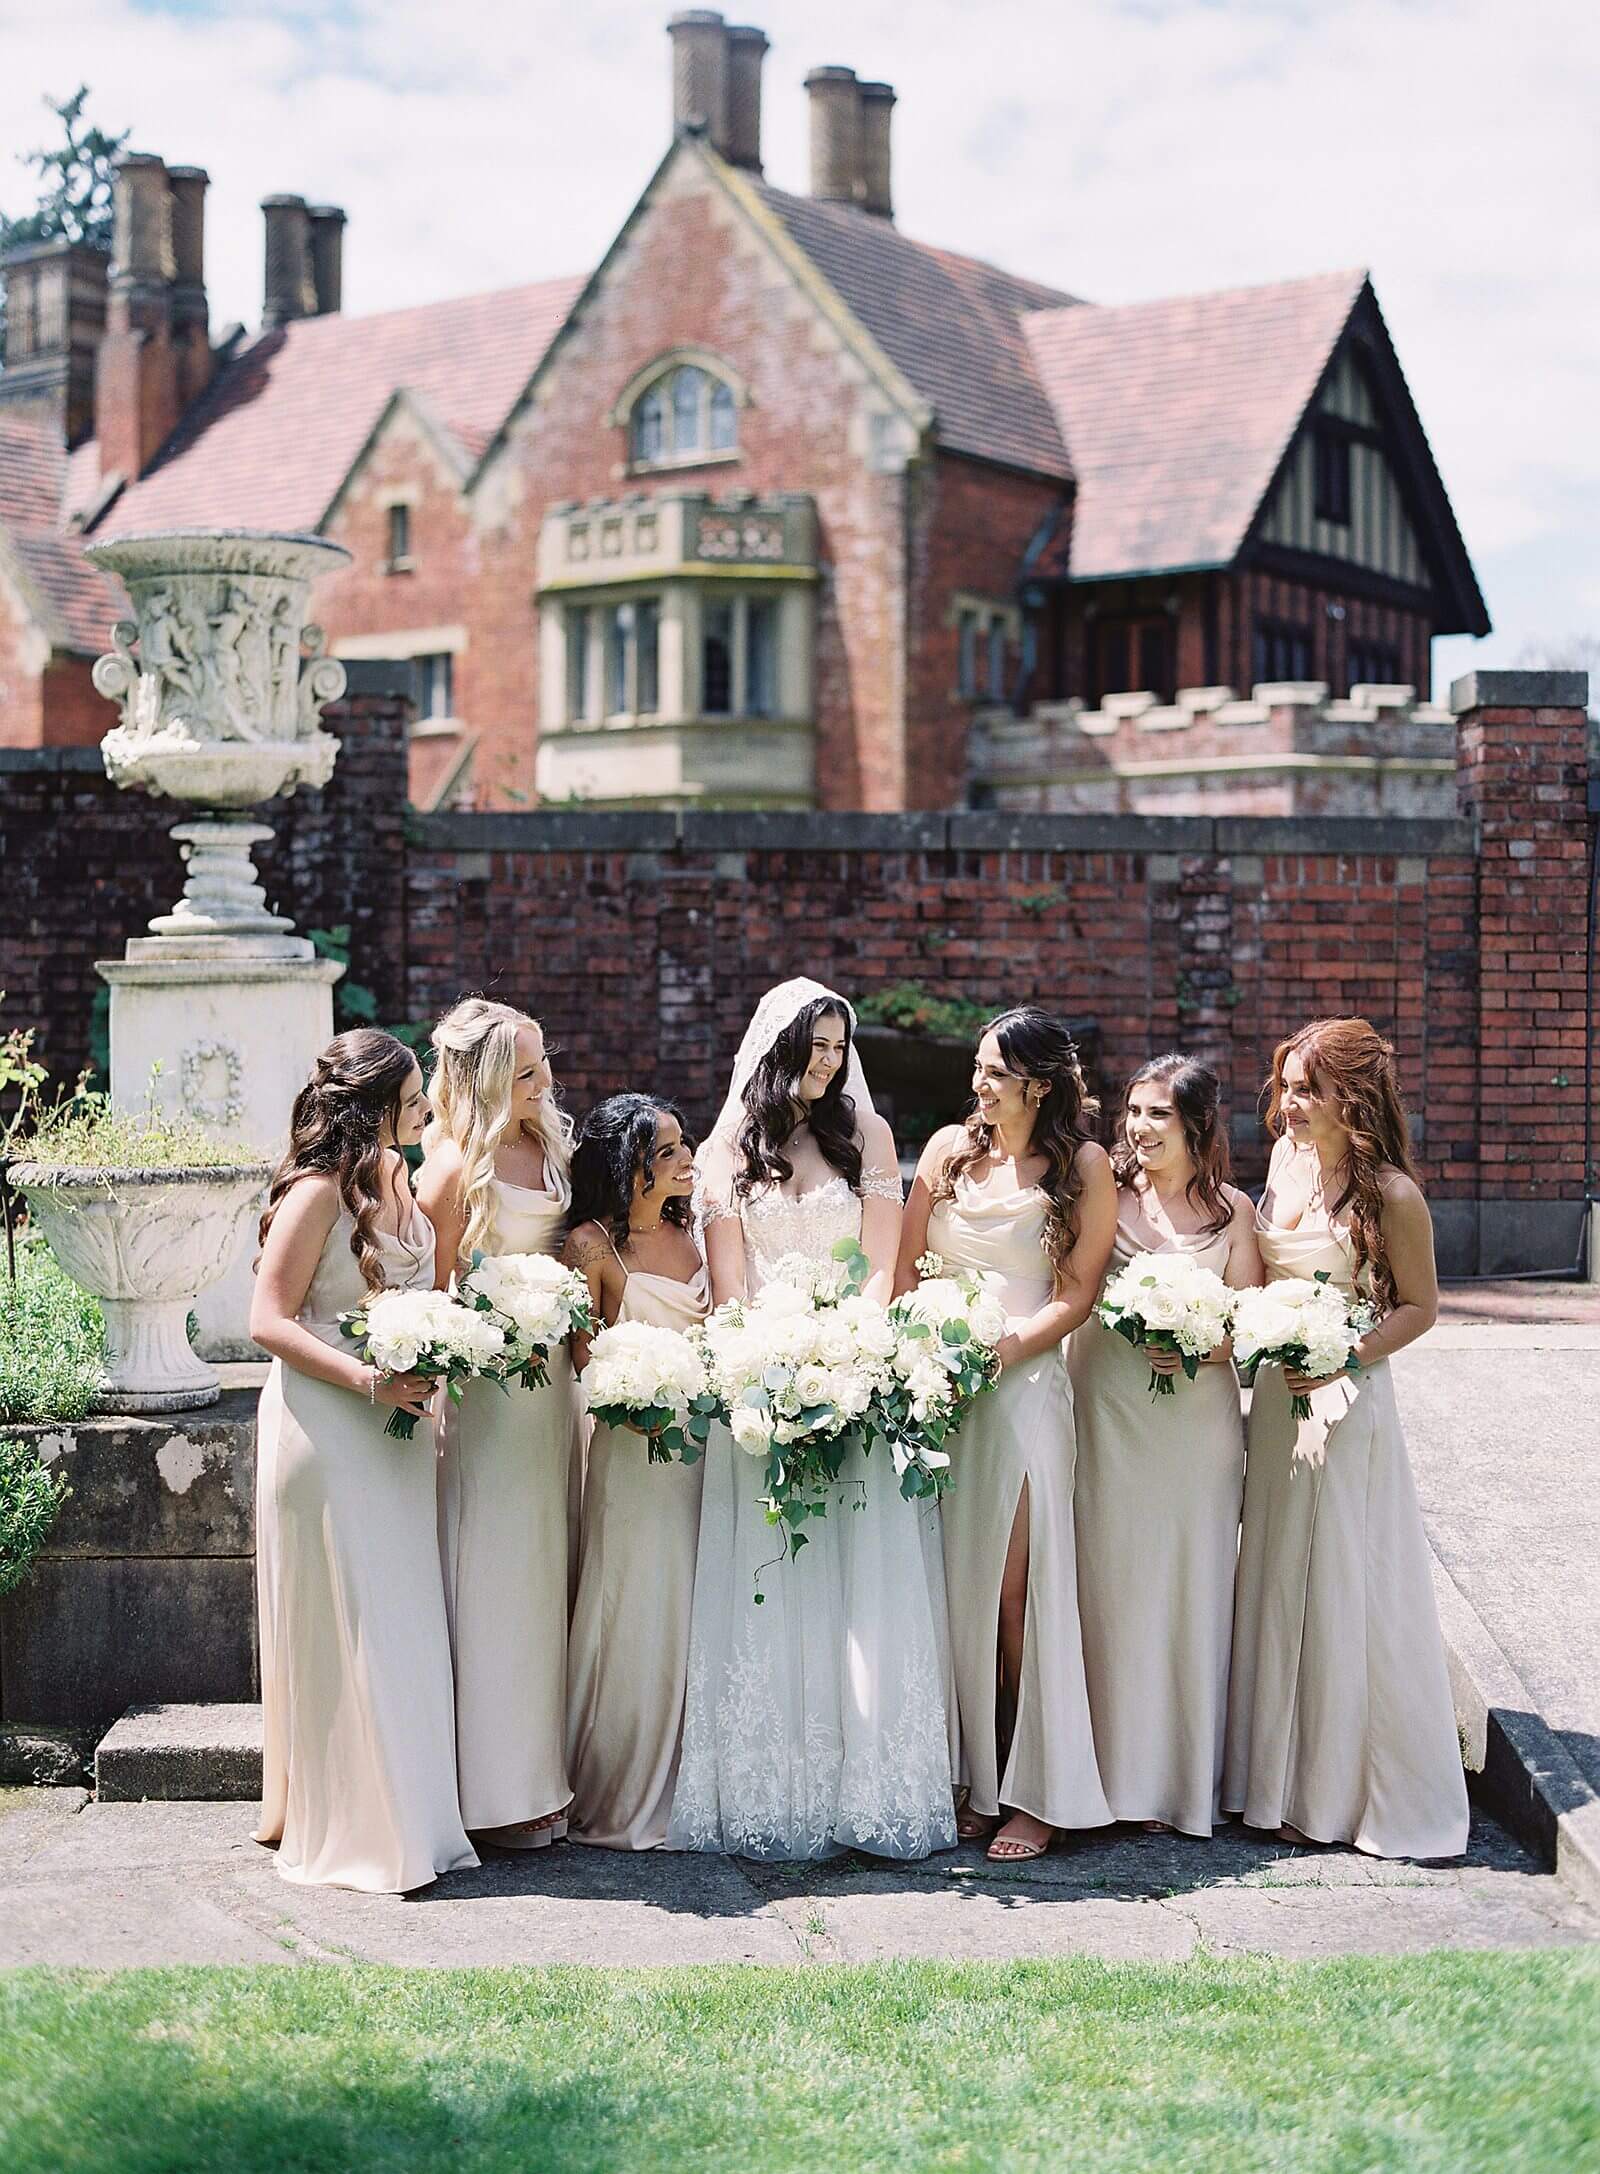 Bride with bridesmaids in champagne gowns at Thornewood Castle - Jacqueline Benét Photography